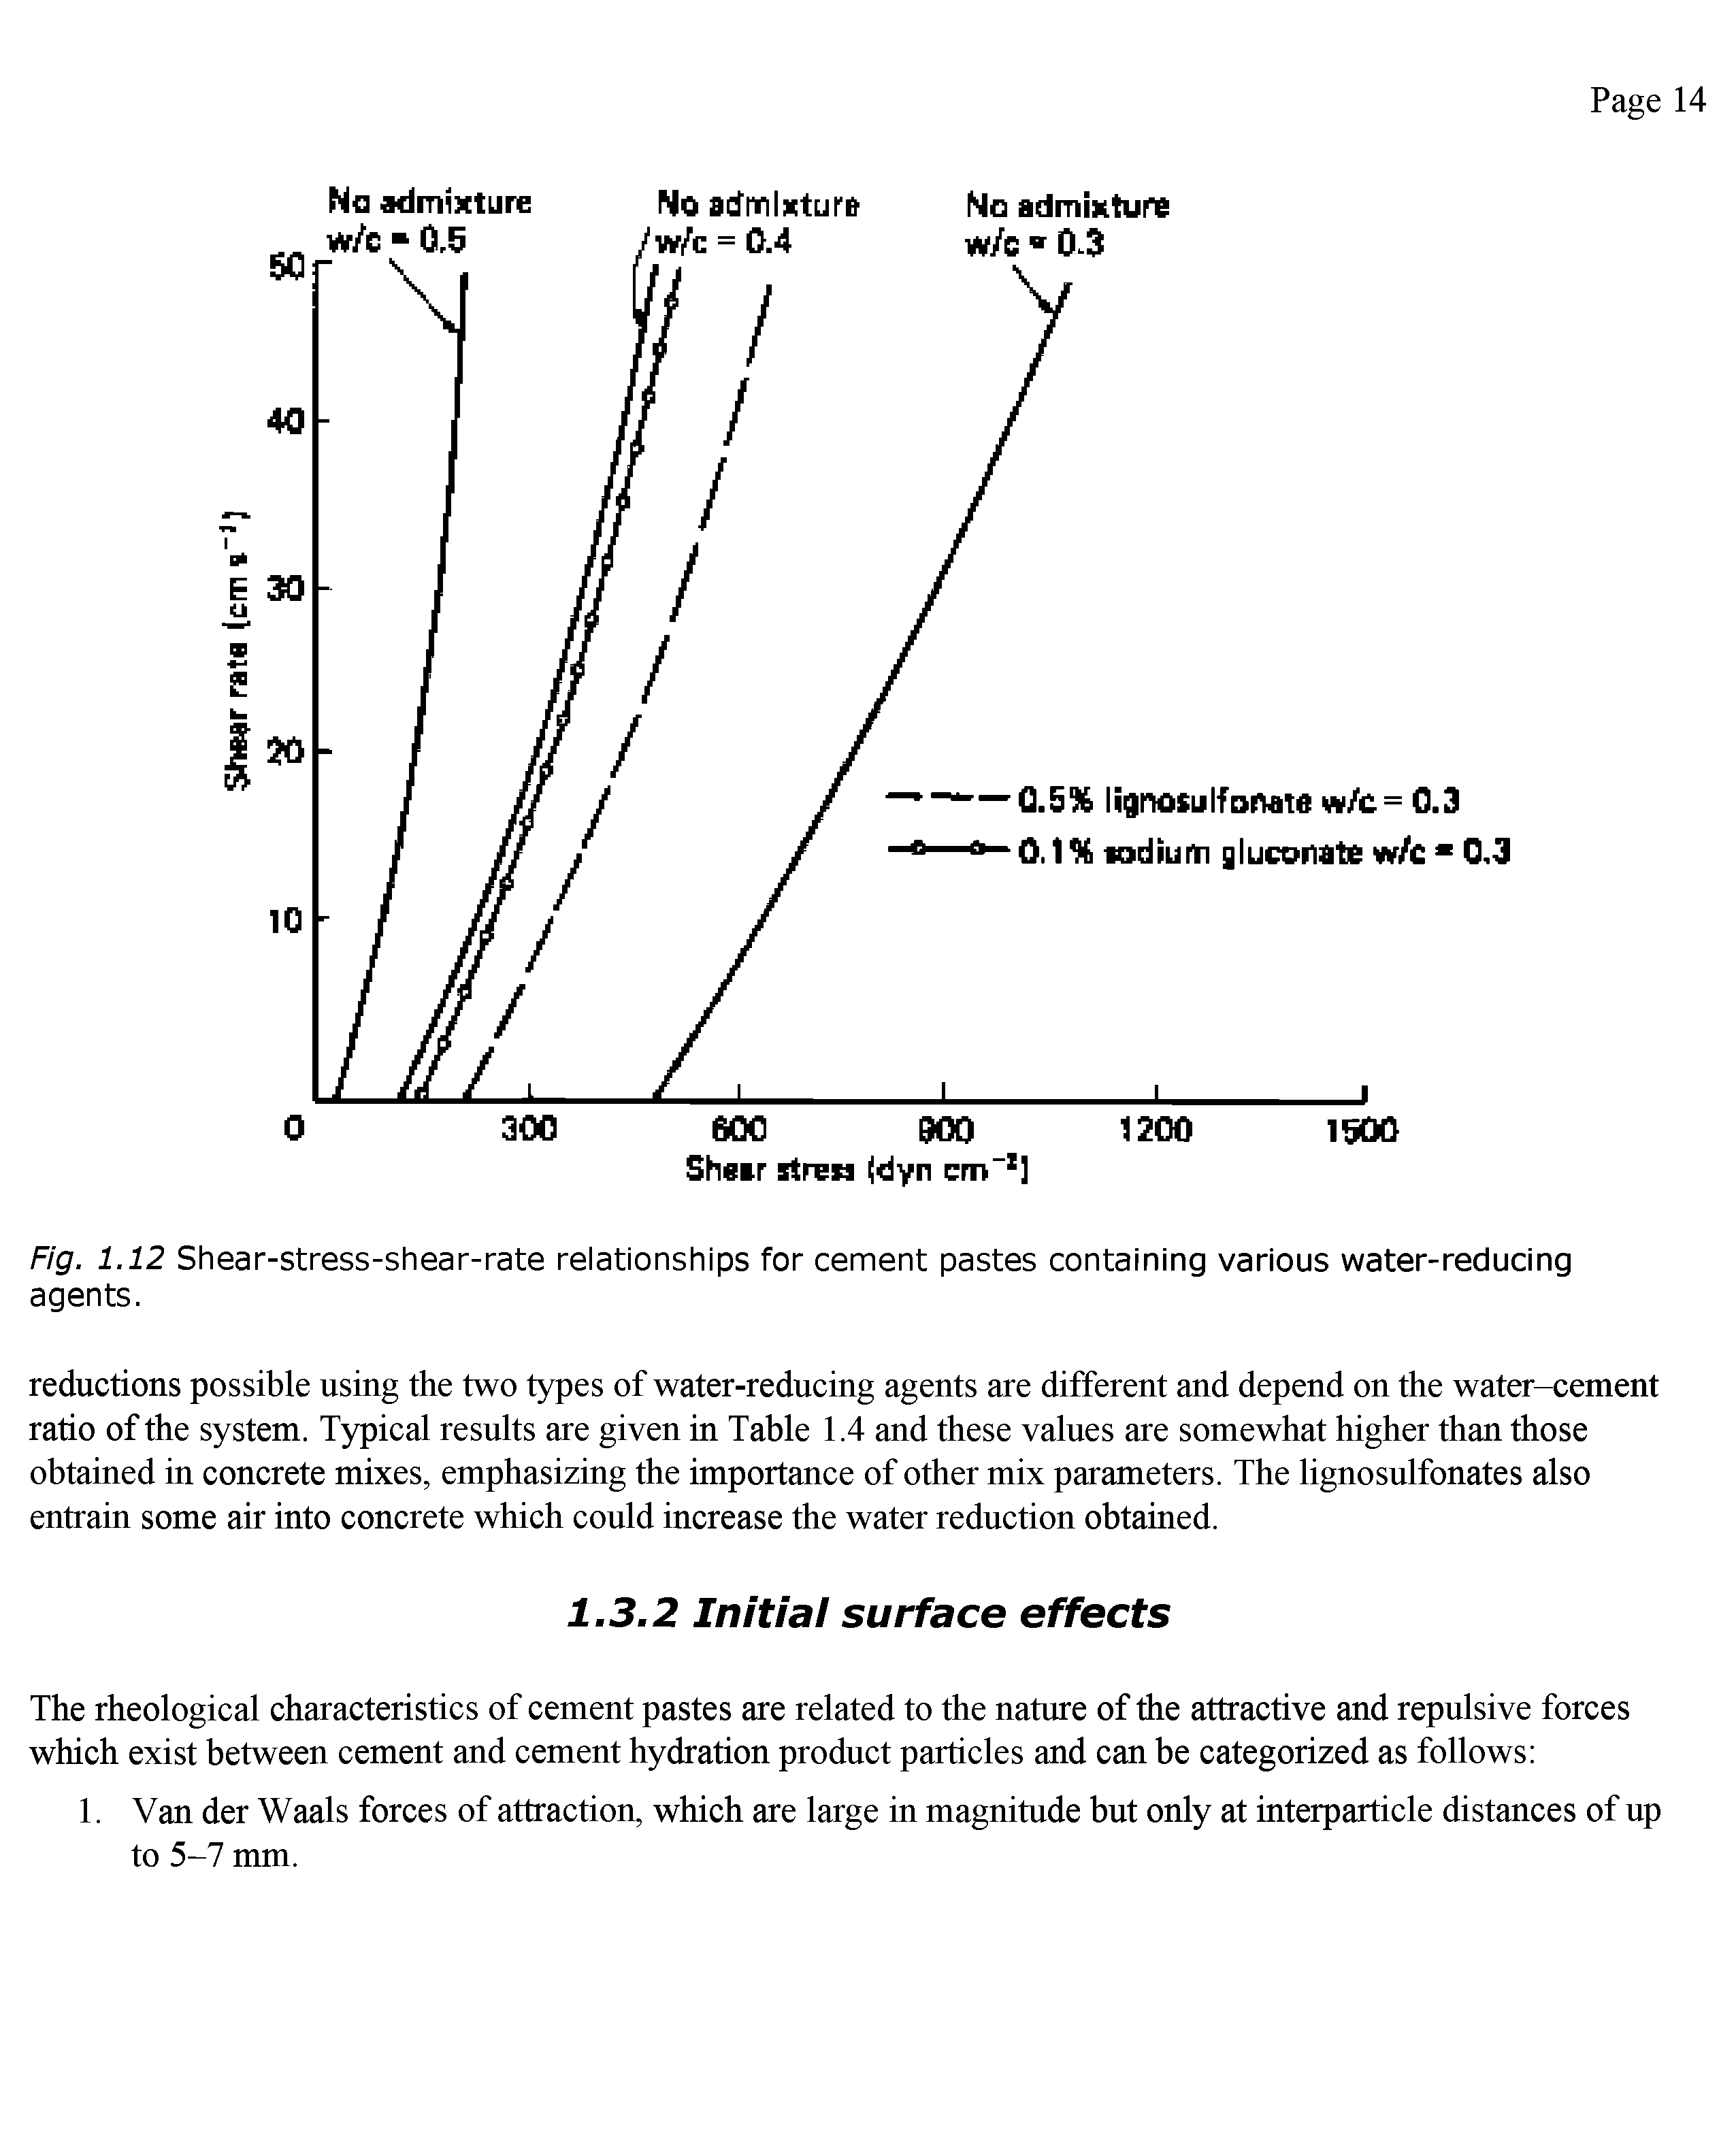 Fig. 1.12 Shear-stress-shear-rate relationships for cement pastes containing various water-reducing agents.